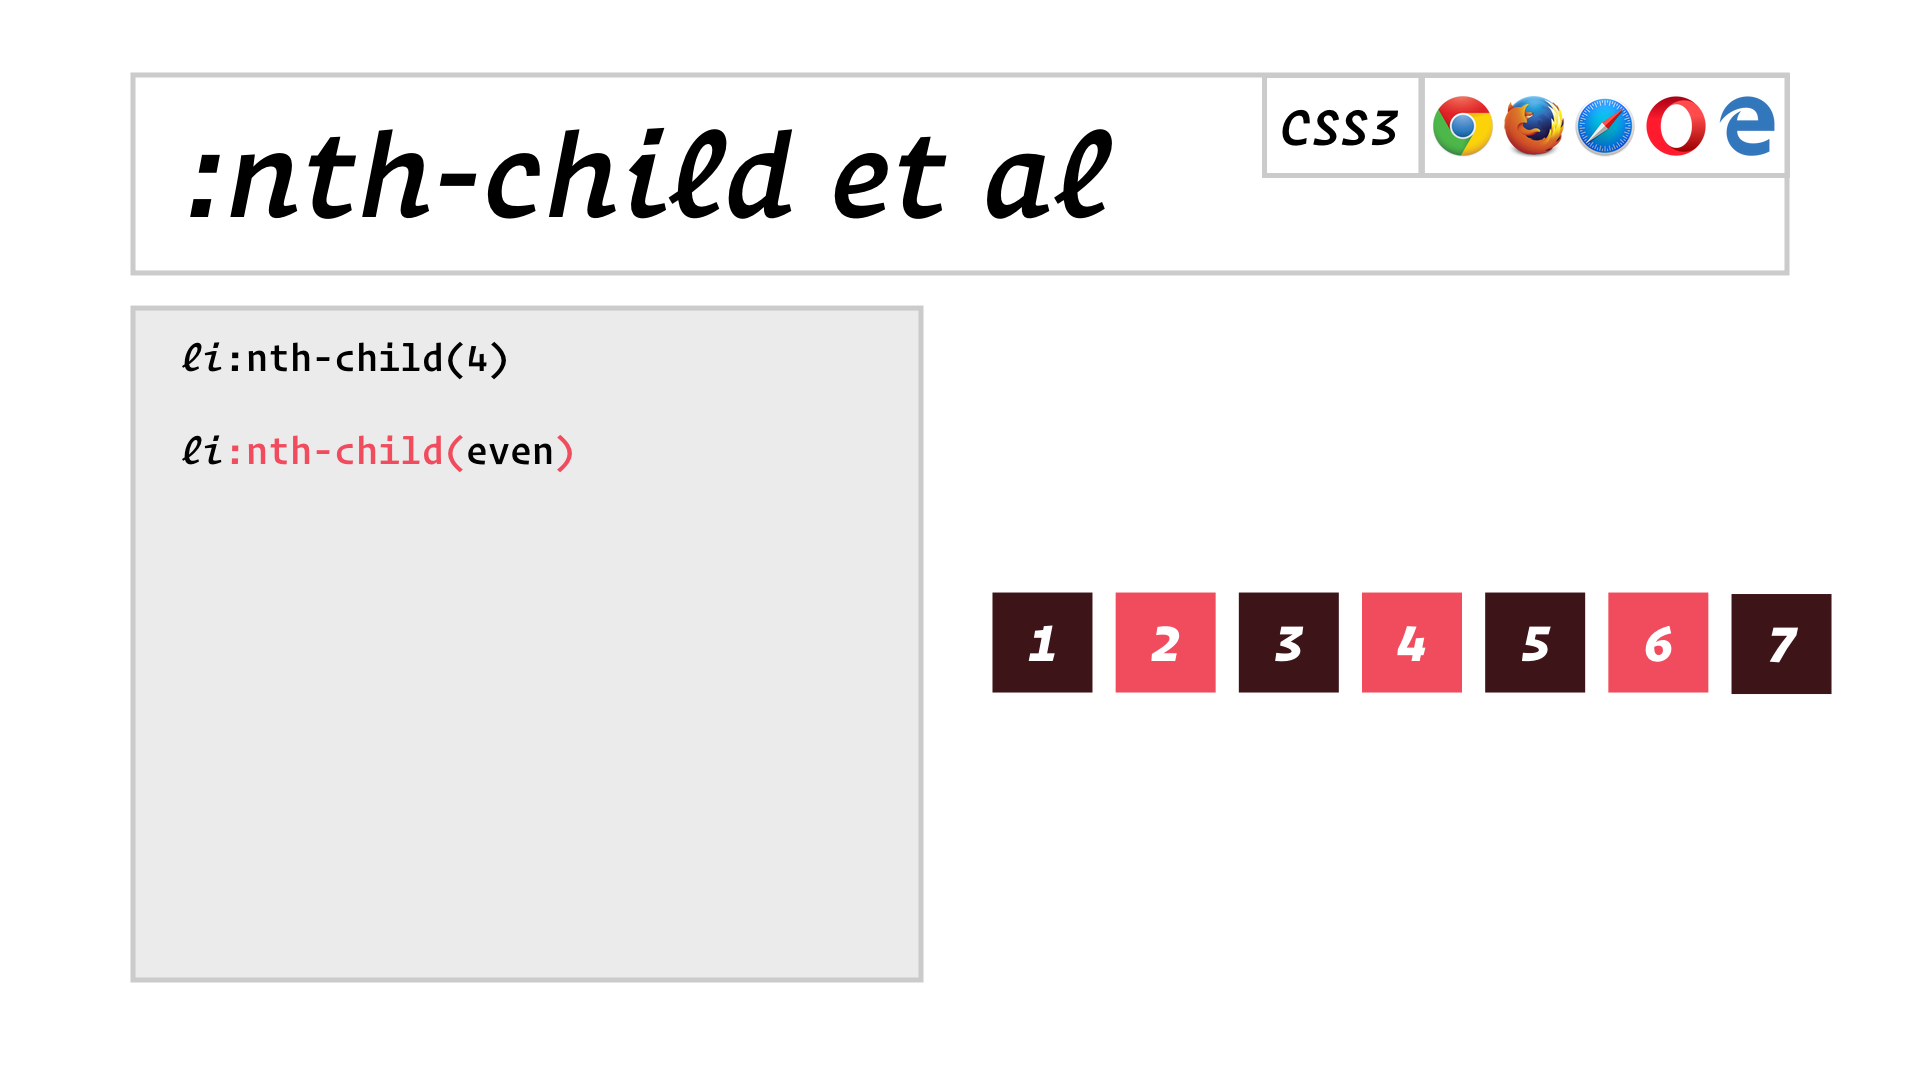 slide: :nth-child(even) selects the 2nd, 4th, 6th child and so on